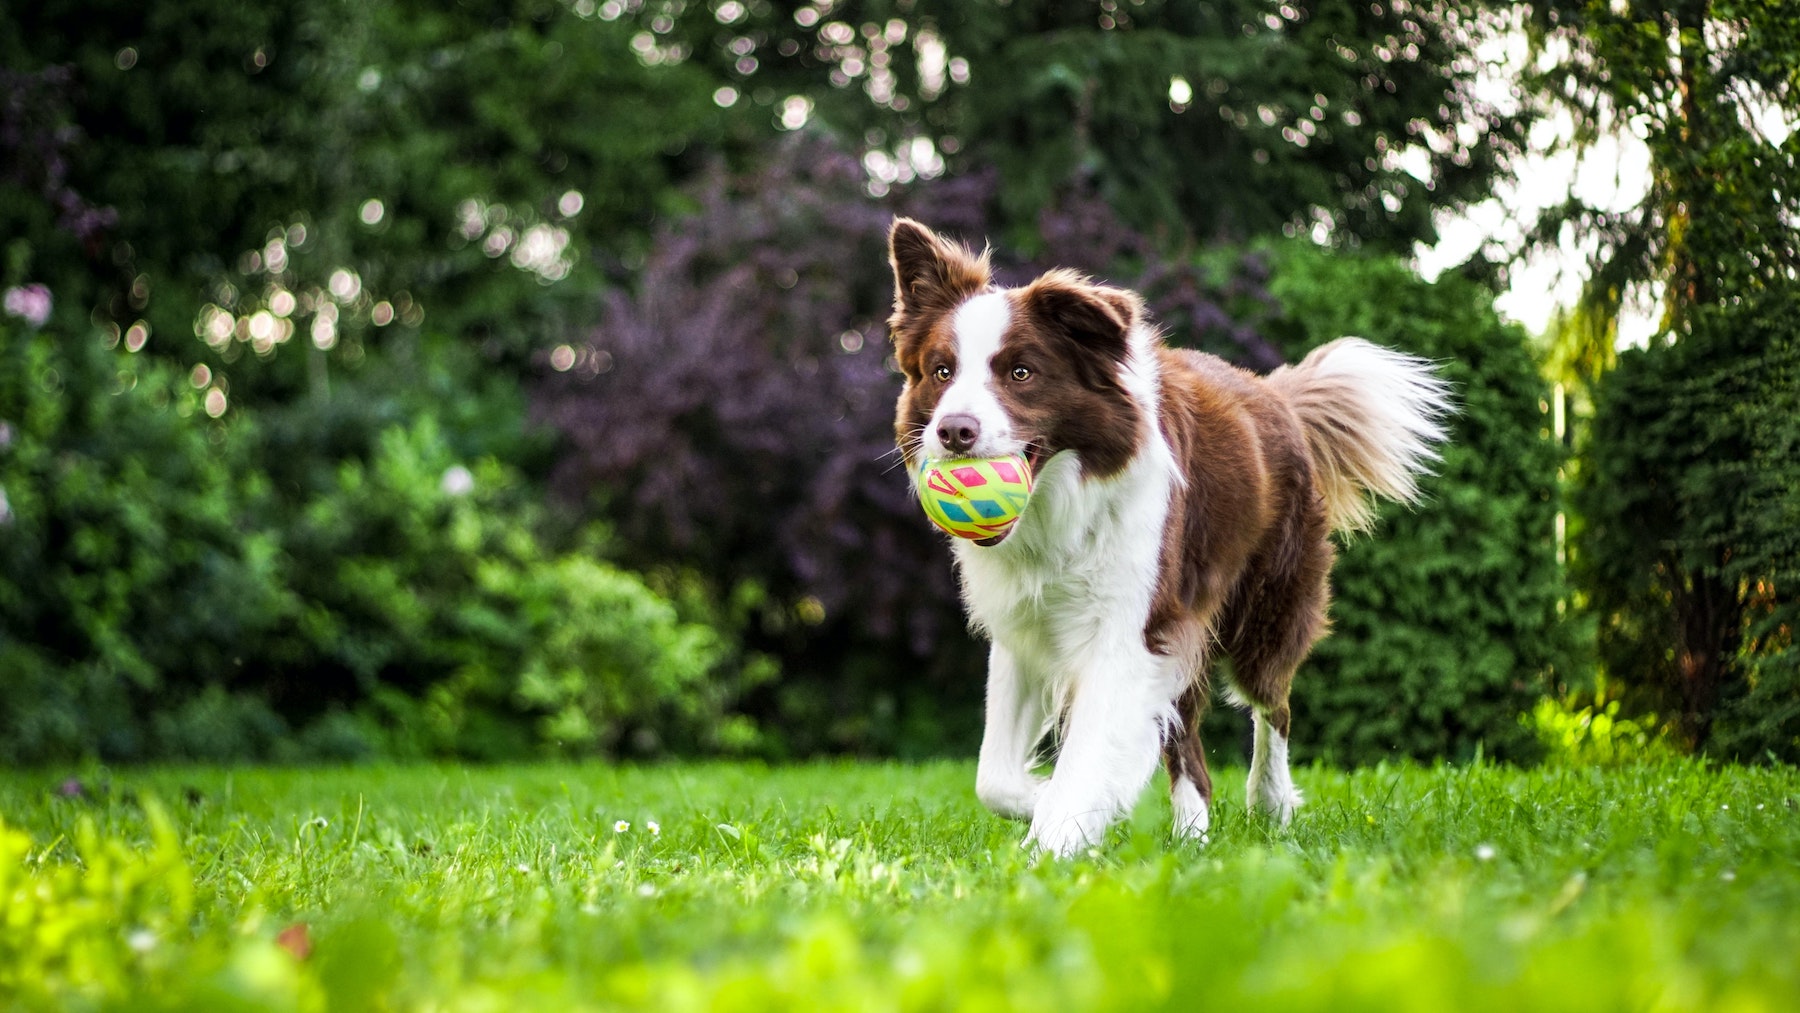 A dog with a ball in its mouth running outside.